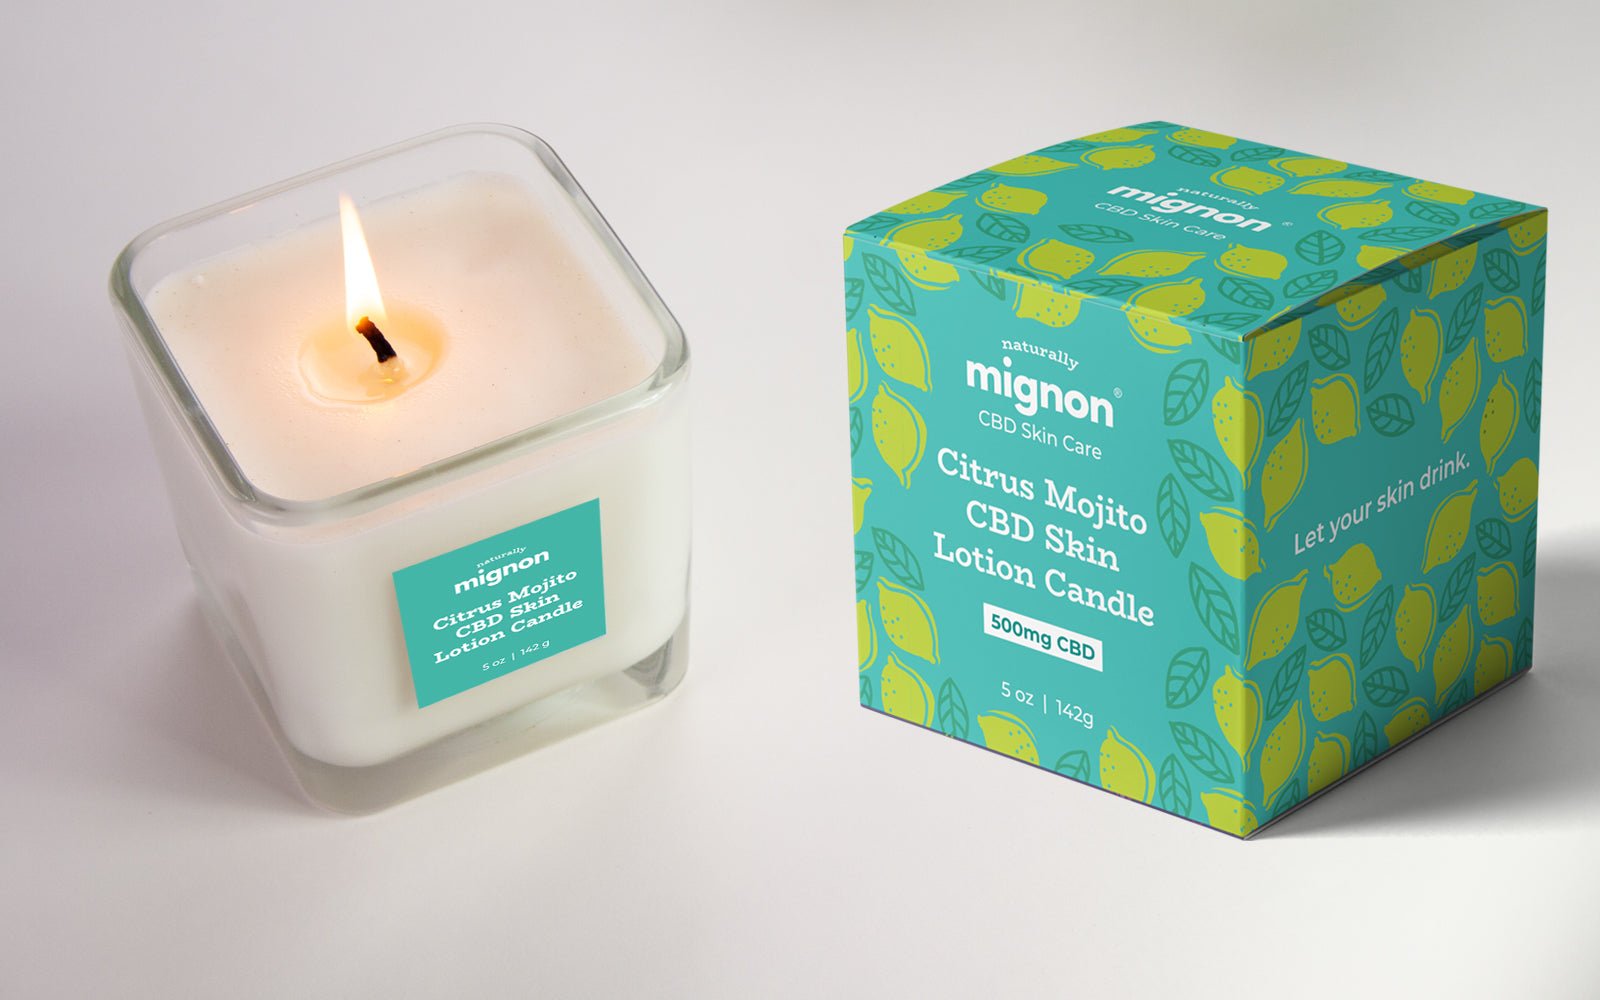 What is a Lotion Candle? - Naturally Mignon CBD